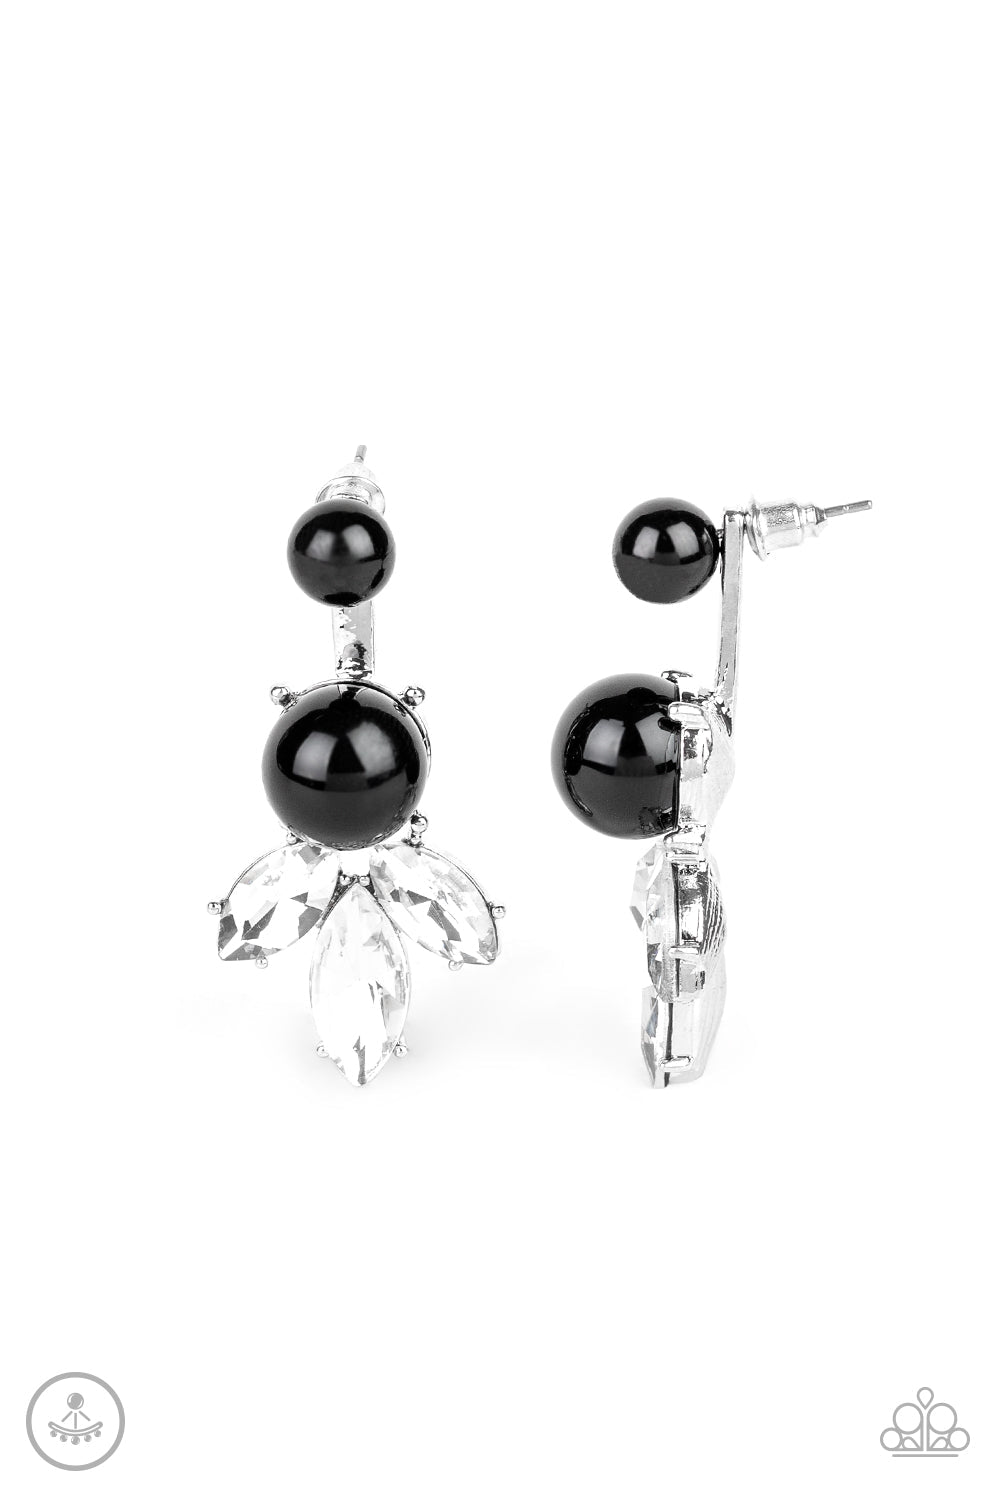 Extra Elite - Black and Silver Fashion Earrings - Paparazzi Accessories - A solitaire black bead attaches to a double-sided post, designed to fasten behind the ear. Infused with an oversized black bead and white rhinestone fringe, the double sided-post peeks out beneath the ear for a glamorous finish. Earring attaches to a standard post fitting fashion earrings.